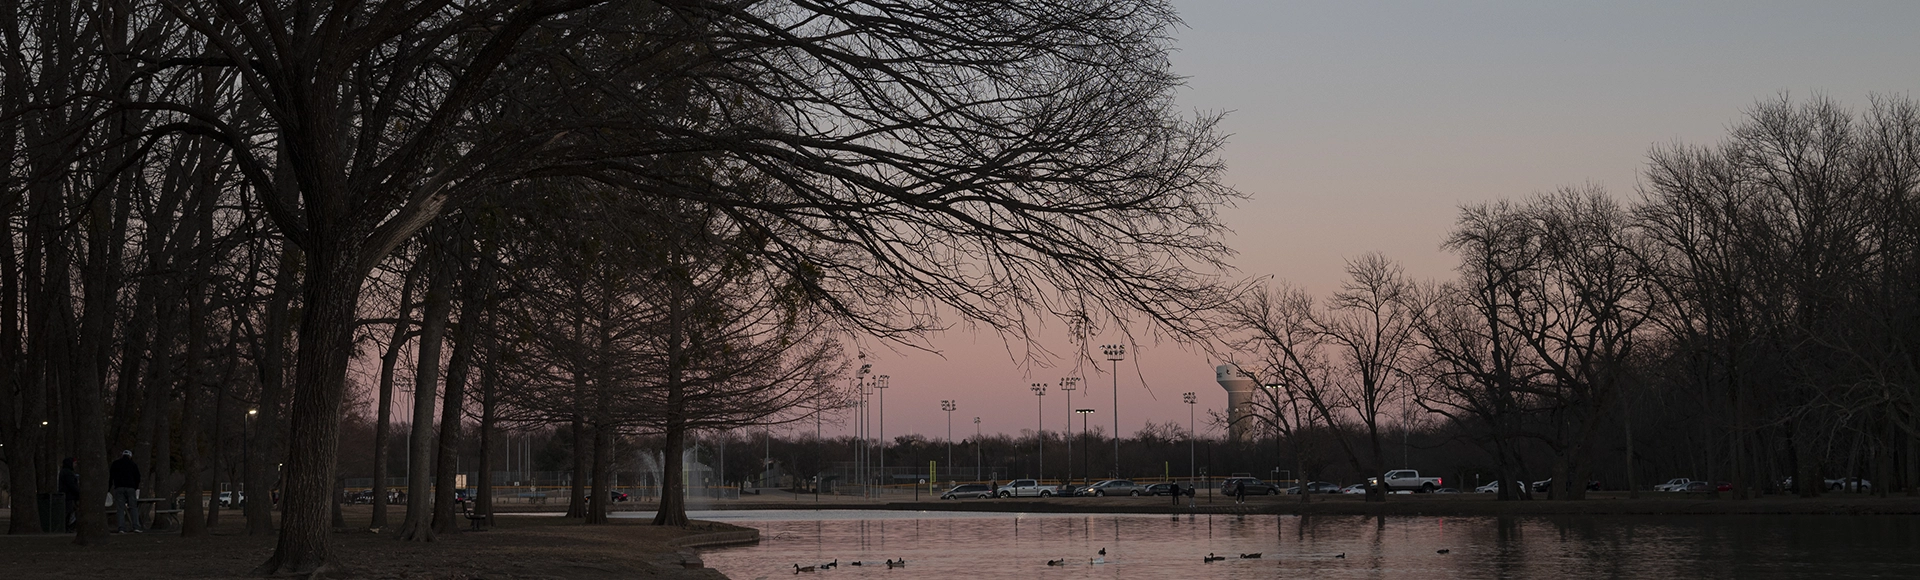 Scenic Towne Lake Park lined with bare trees during sunset at McKinney, Texas